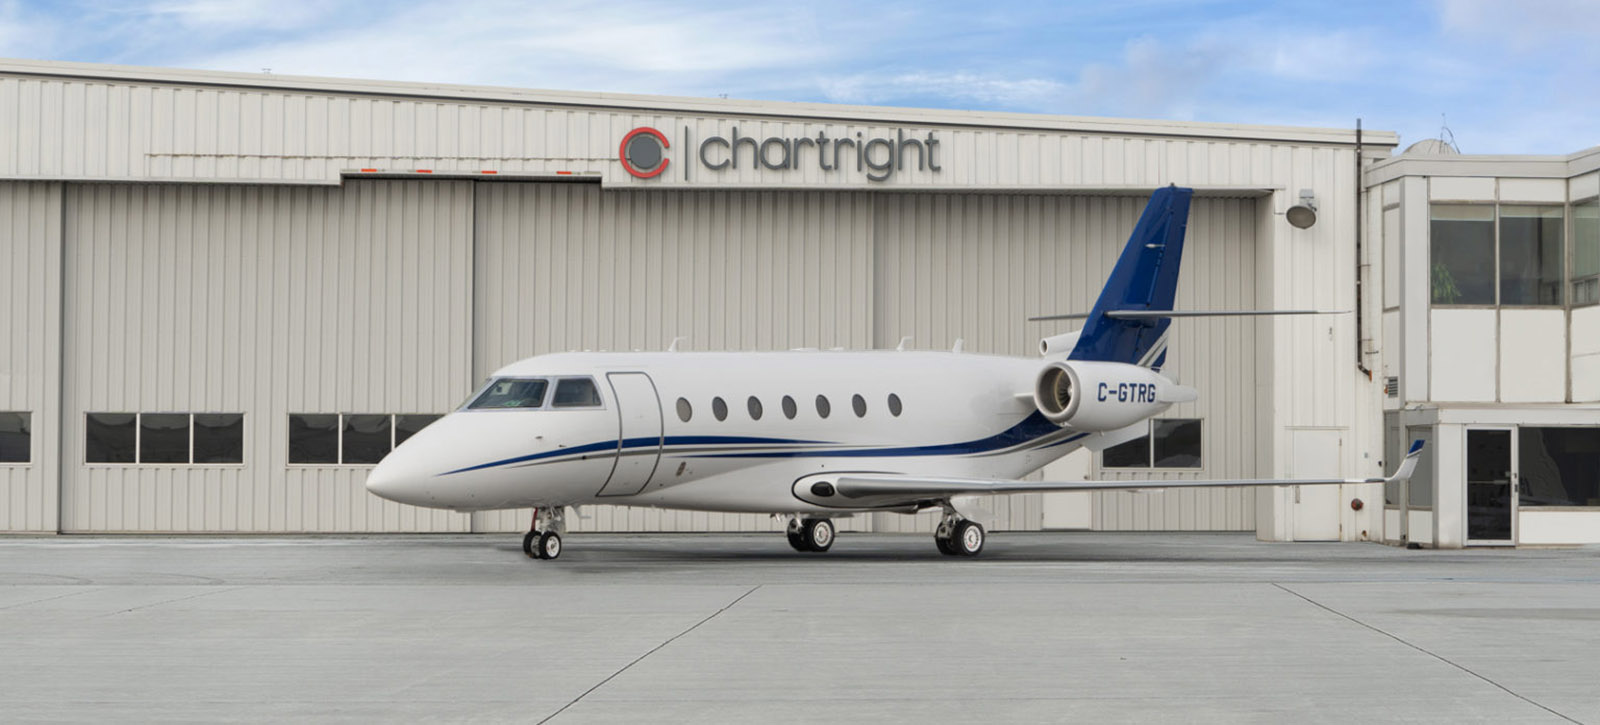 Chartright’s Fleet Continues to Grow